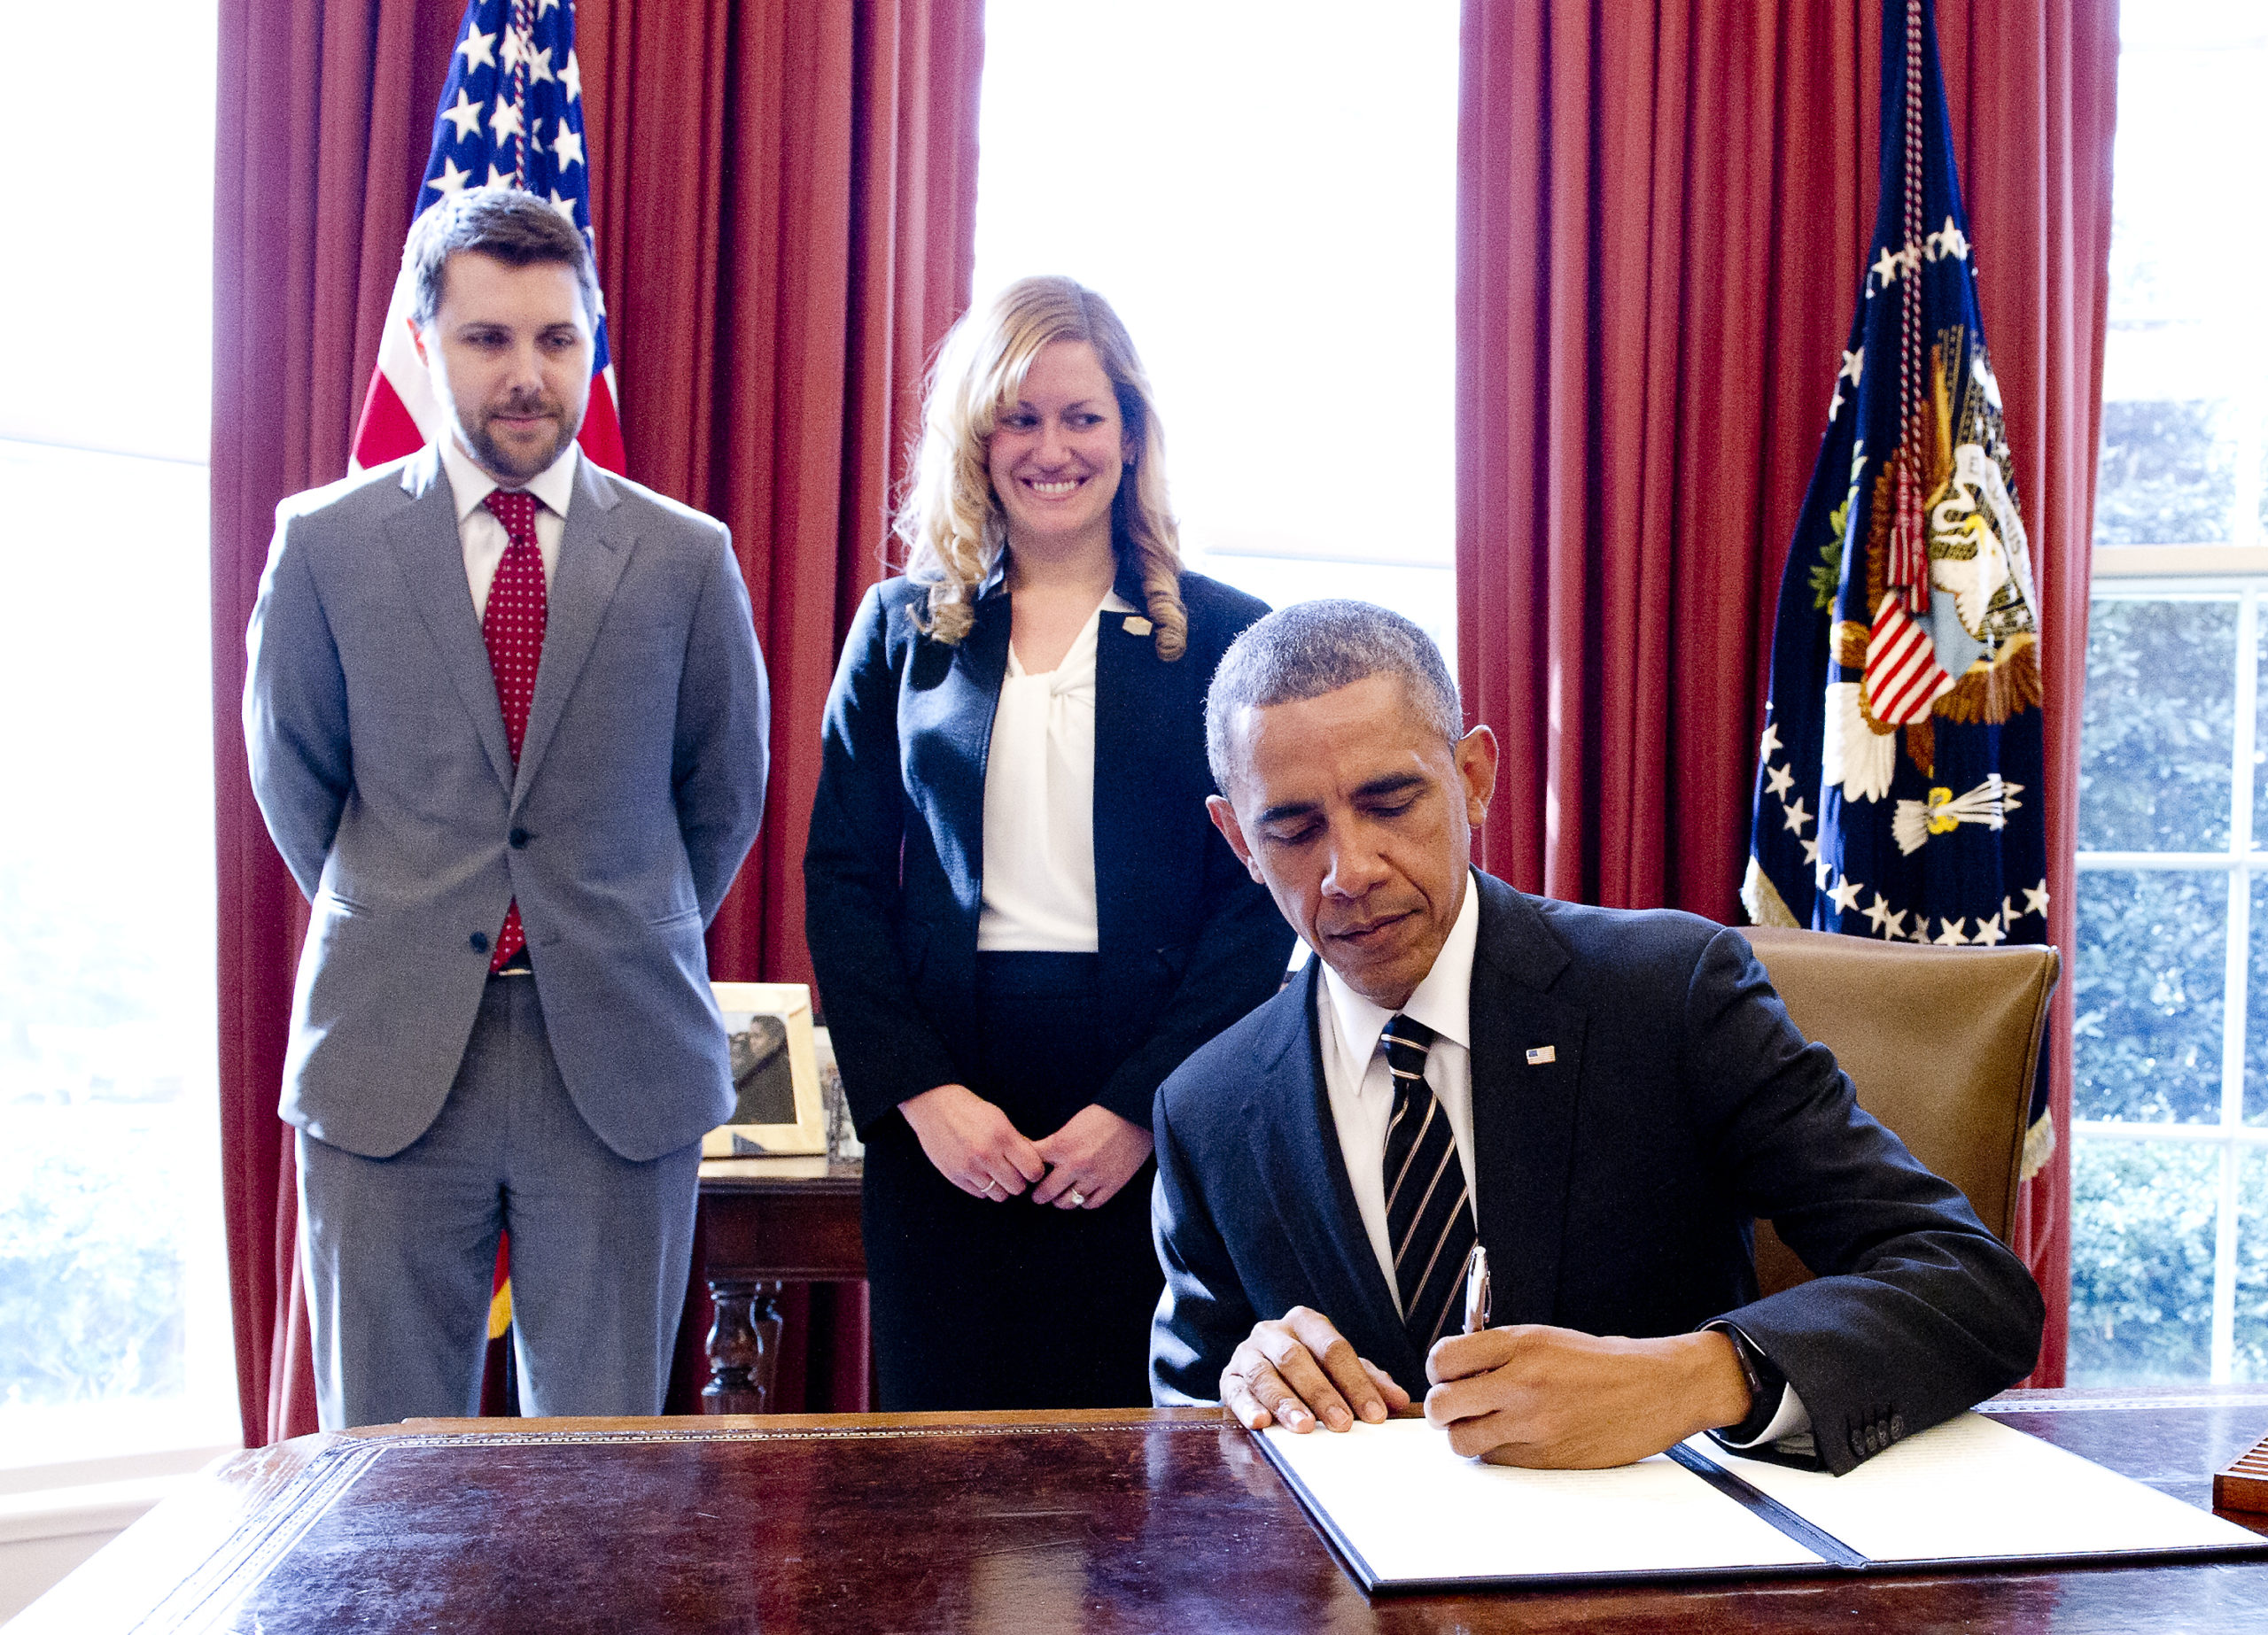 Brian Deese watches as former President Barack Obama signs an Executive Order, titled "Planning for Sustainability in the Next Decade" in the Oval Office on March 19, 2015. (Ron Sachs-Pool/Getty Images)